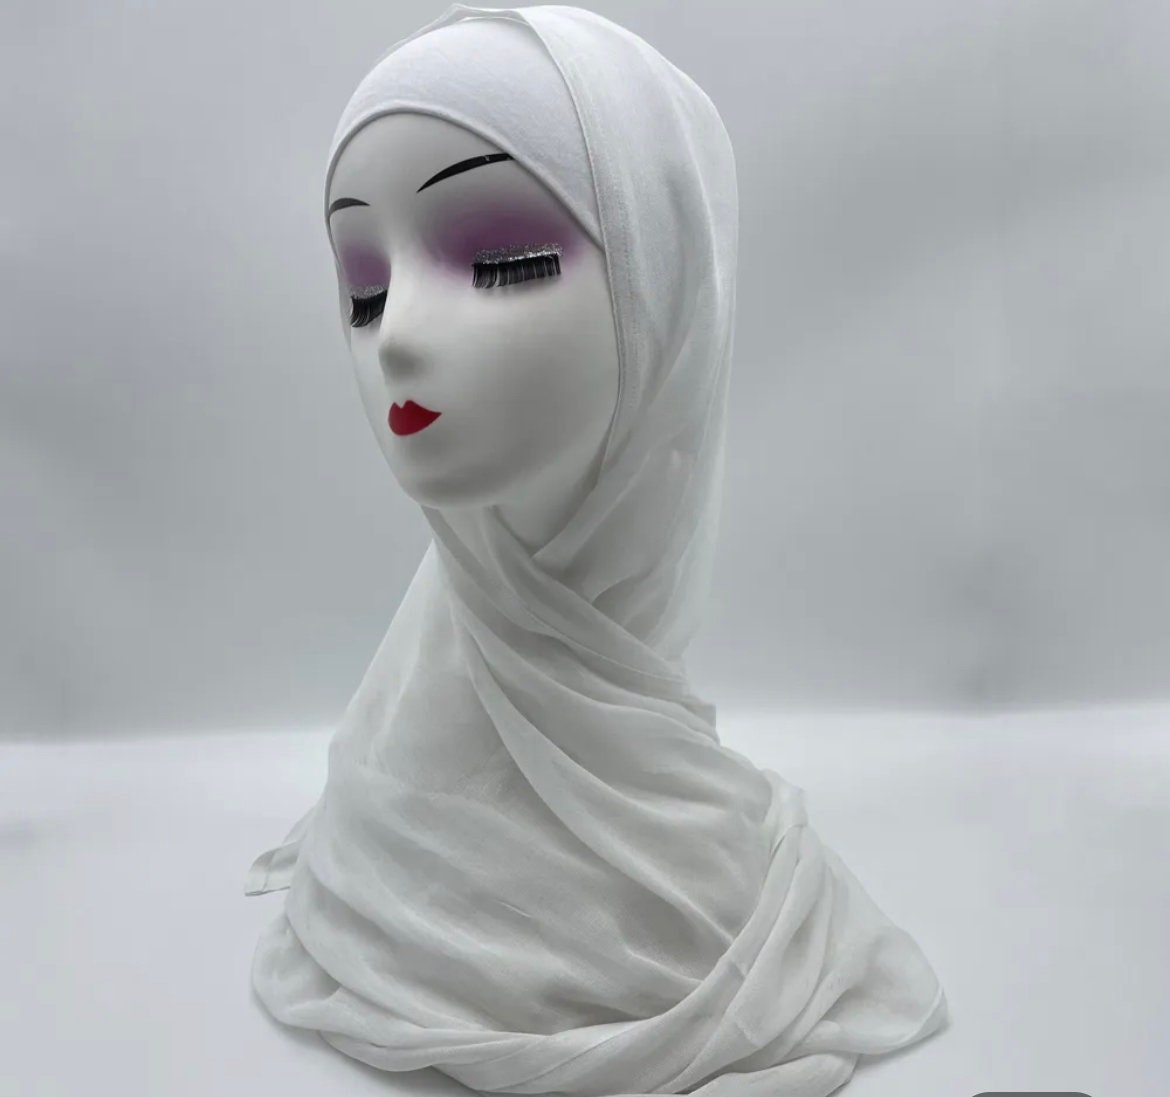 Cotton Under Scarf White Hijab Scarf $10 Free Shipping!